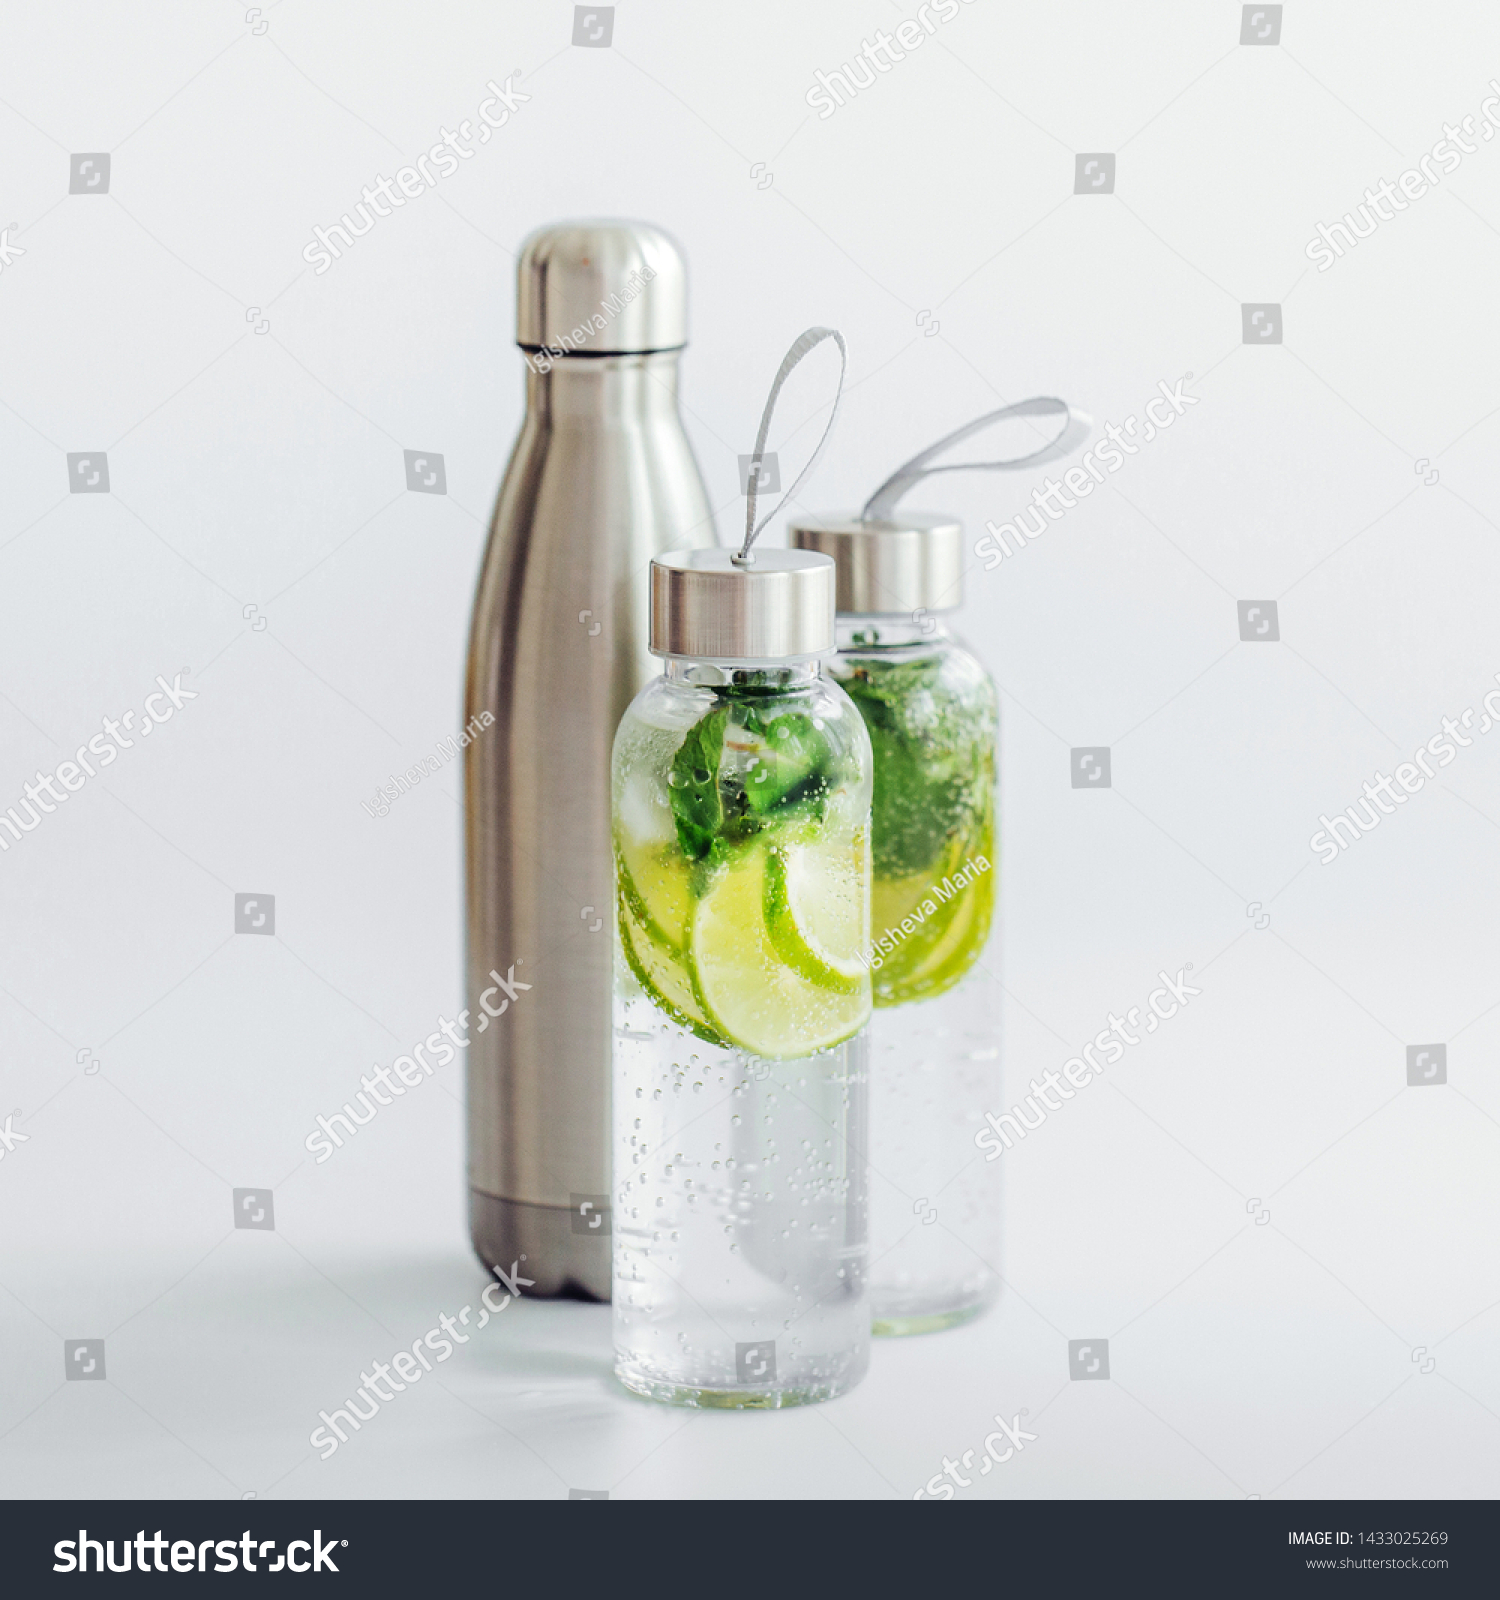 Fresh lime and mint infused water, cocktail, detox drink, lemonade in reusable bottles. Summer drinks. Health care concept. #1433025269